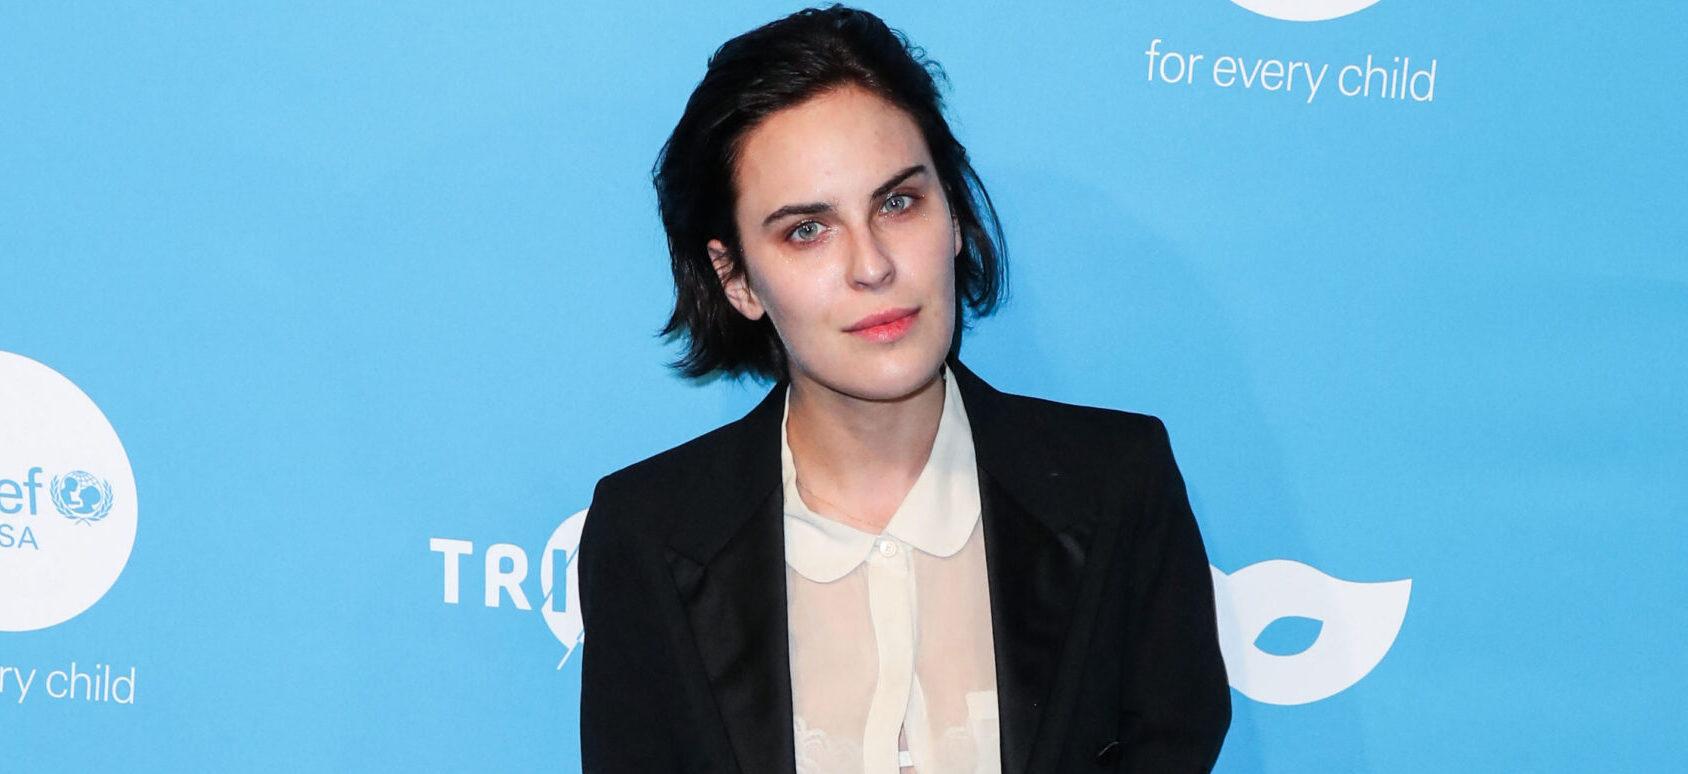 Tallulah Willis Happily ‘Busts’ Into This Era While Flaunting Healthy Gains